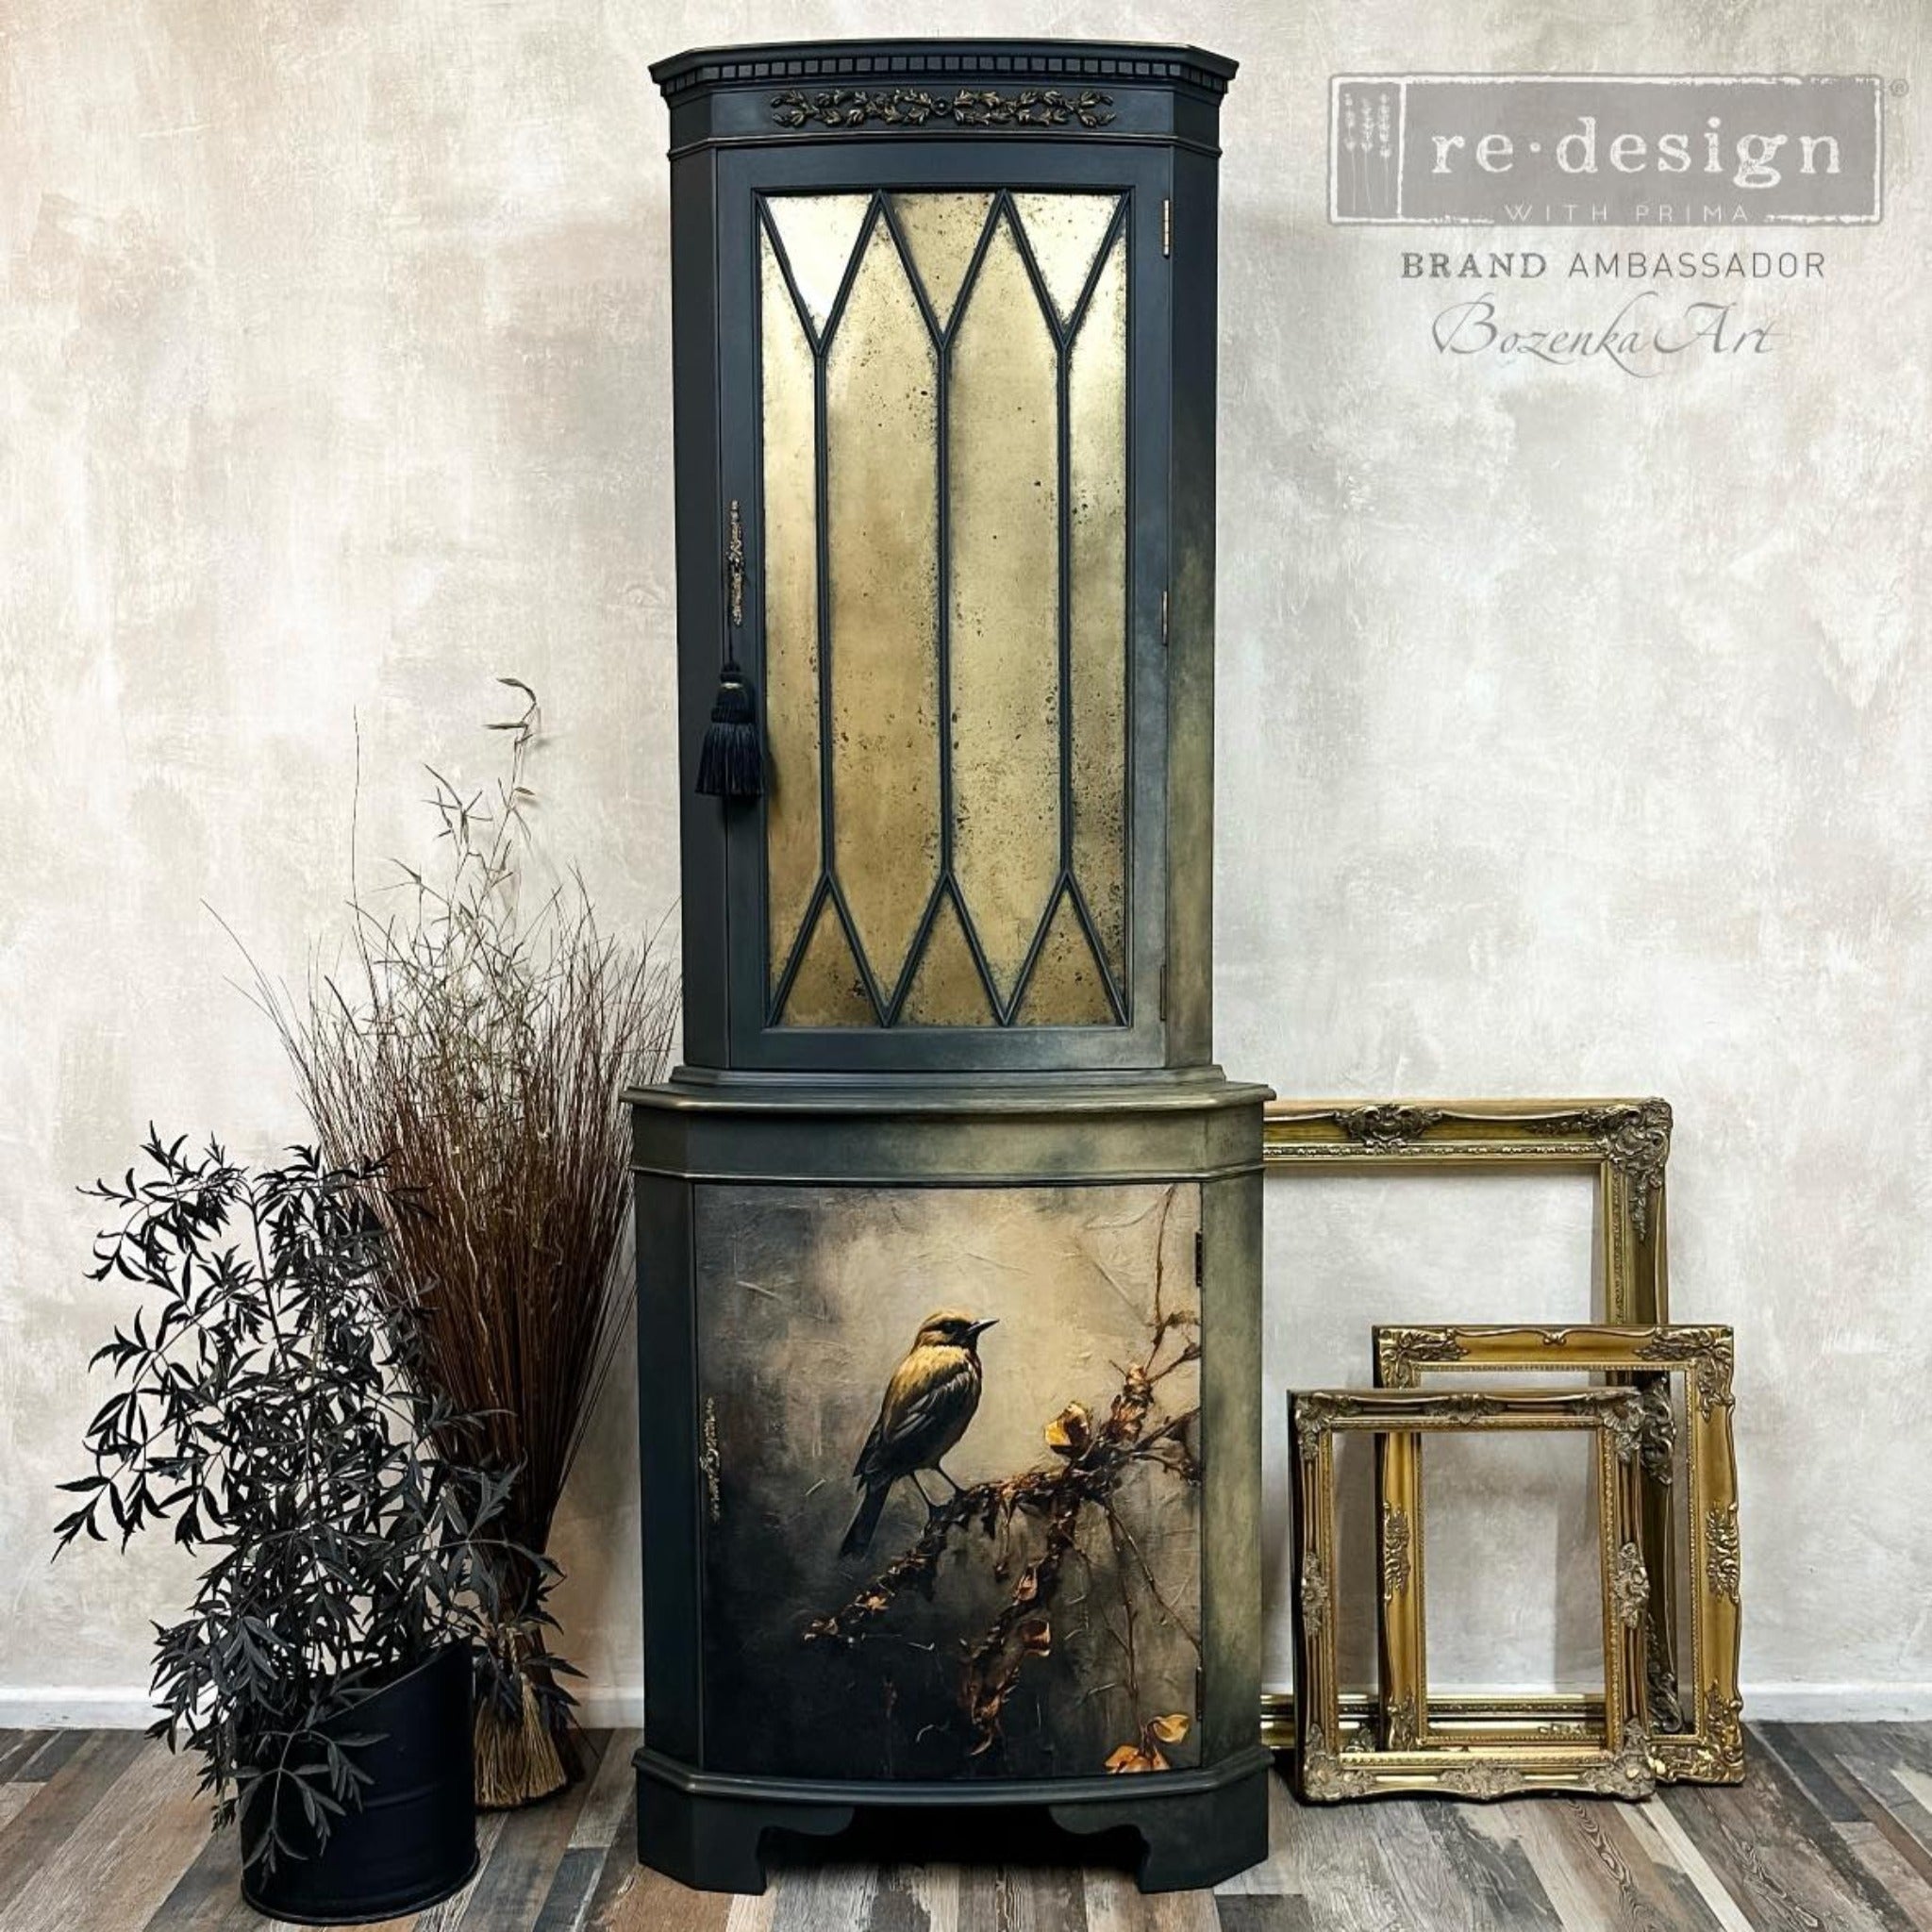 A vintage curio hutch refurbished by Bozenka Art is painted black with gold accents and features ReDesign with Prima's Rustic Refuge A1 fiber paper on its bottom door.